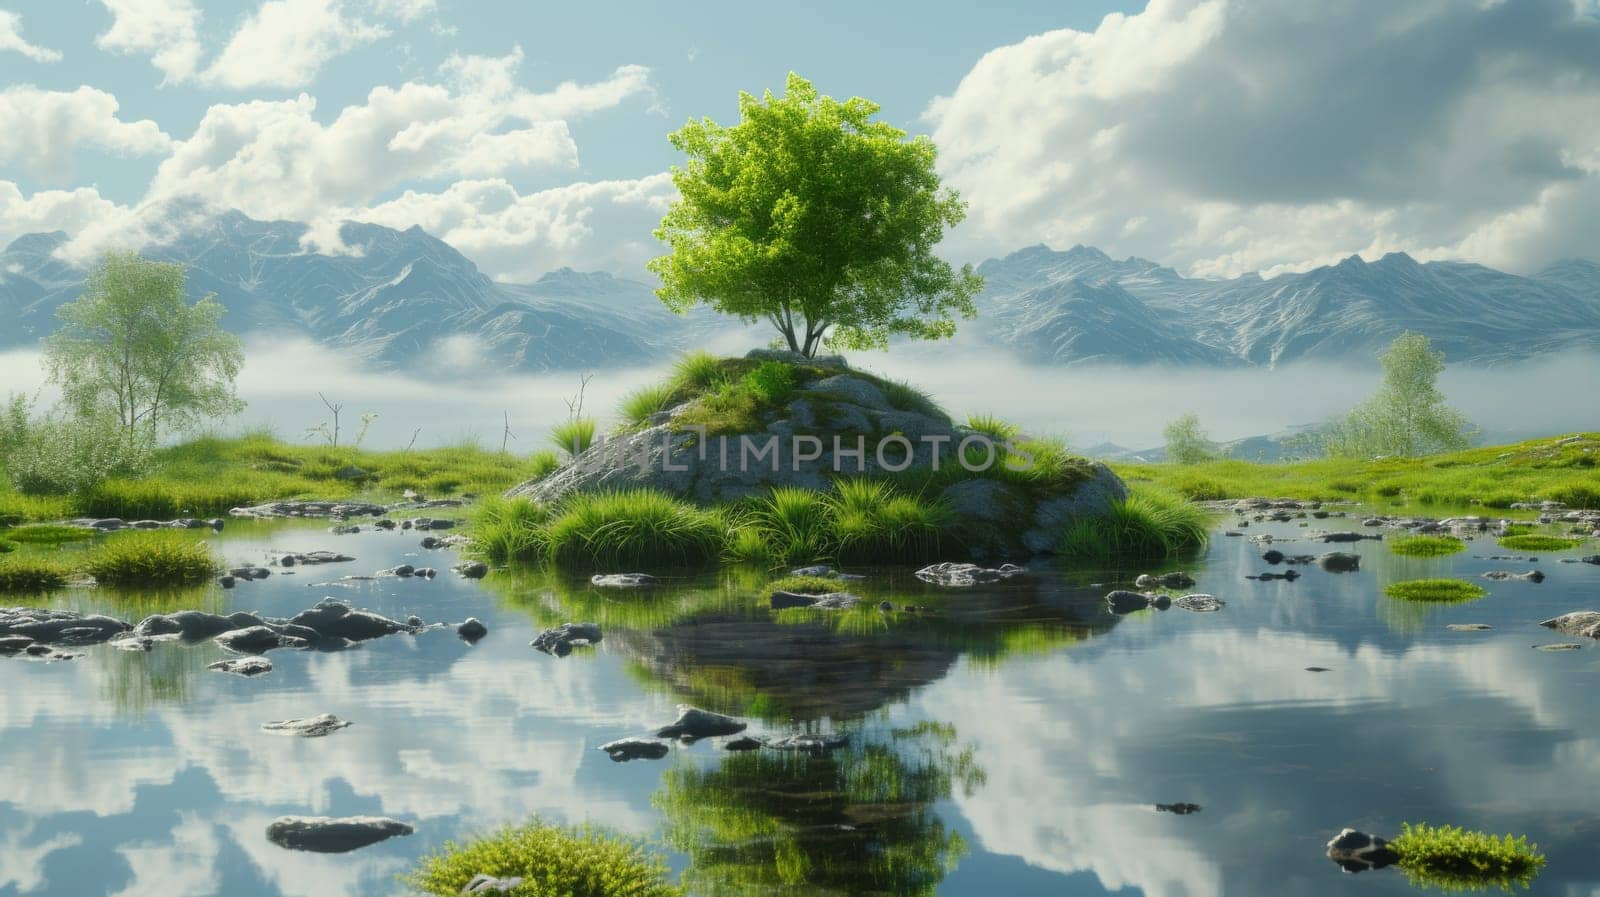 A small tree on a rock in the middle of water